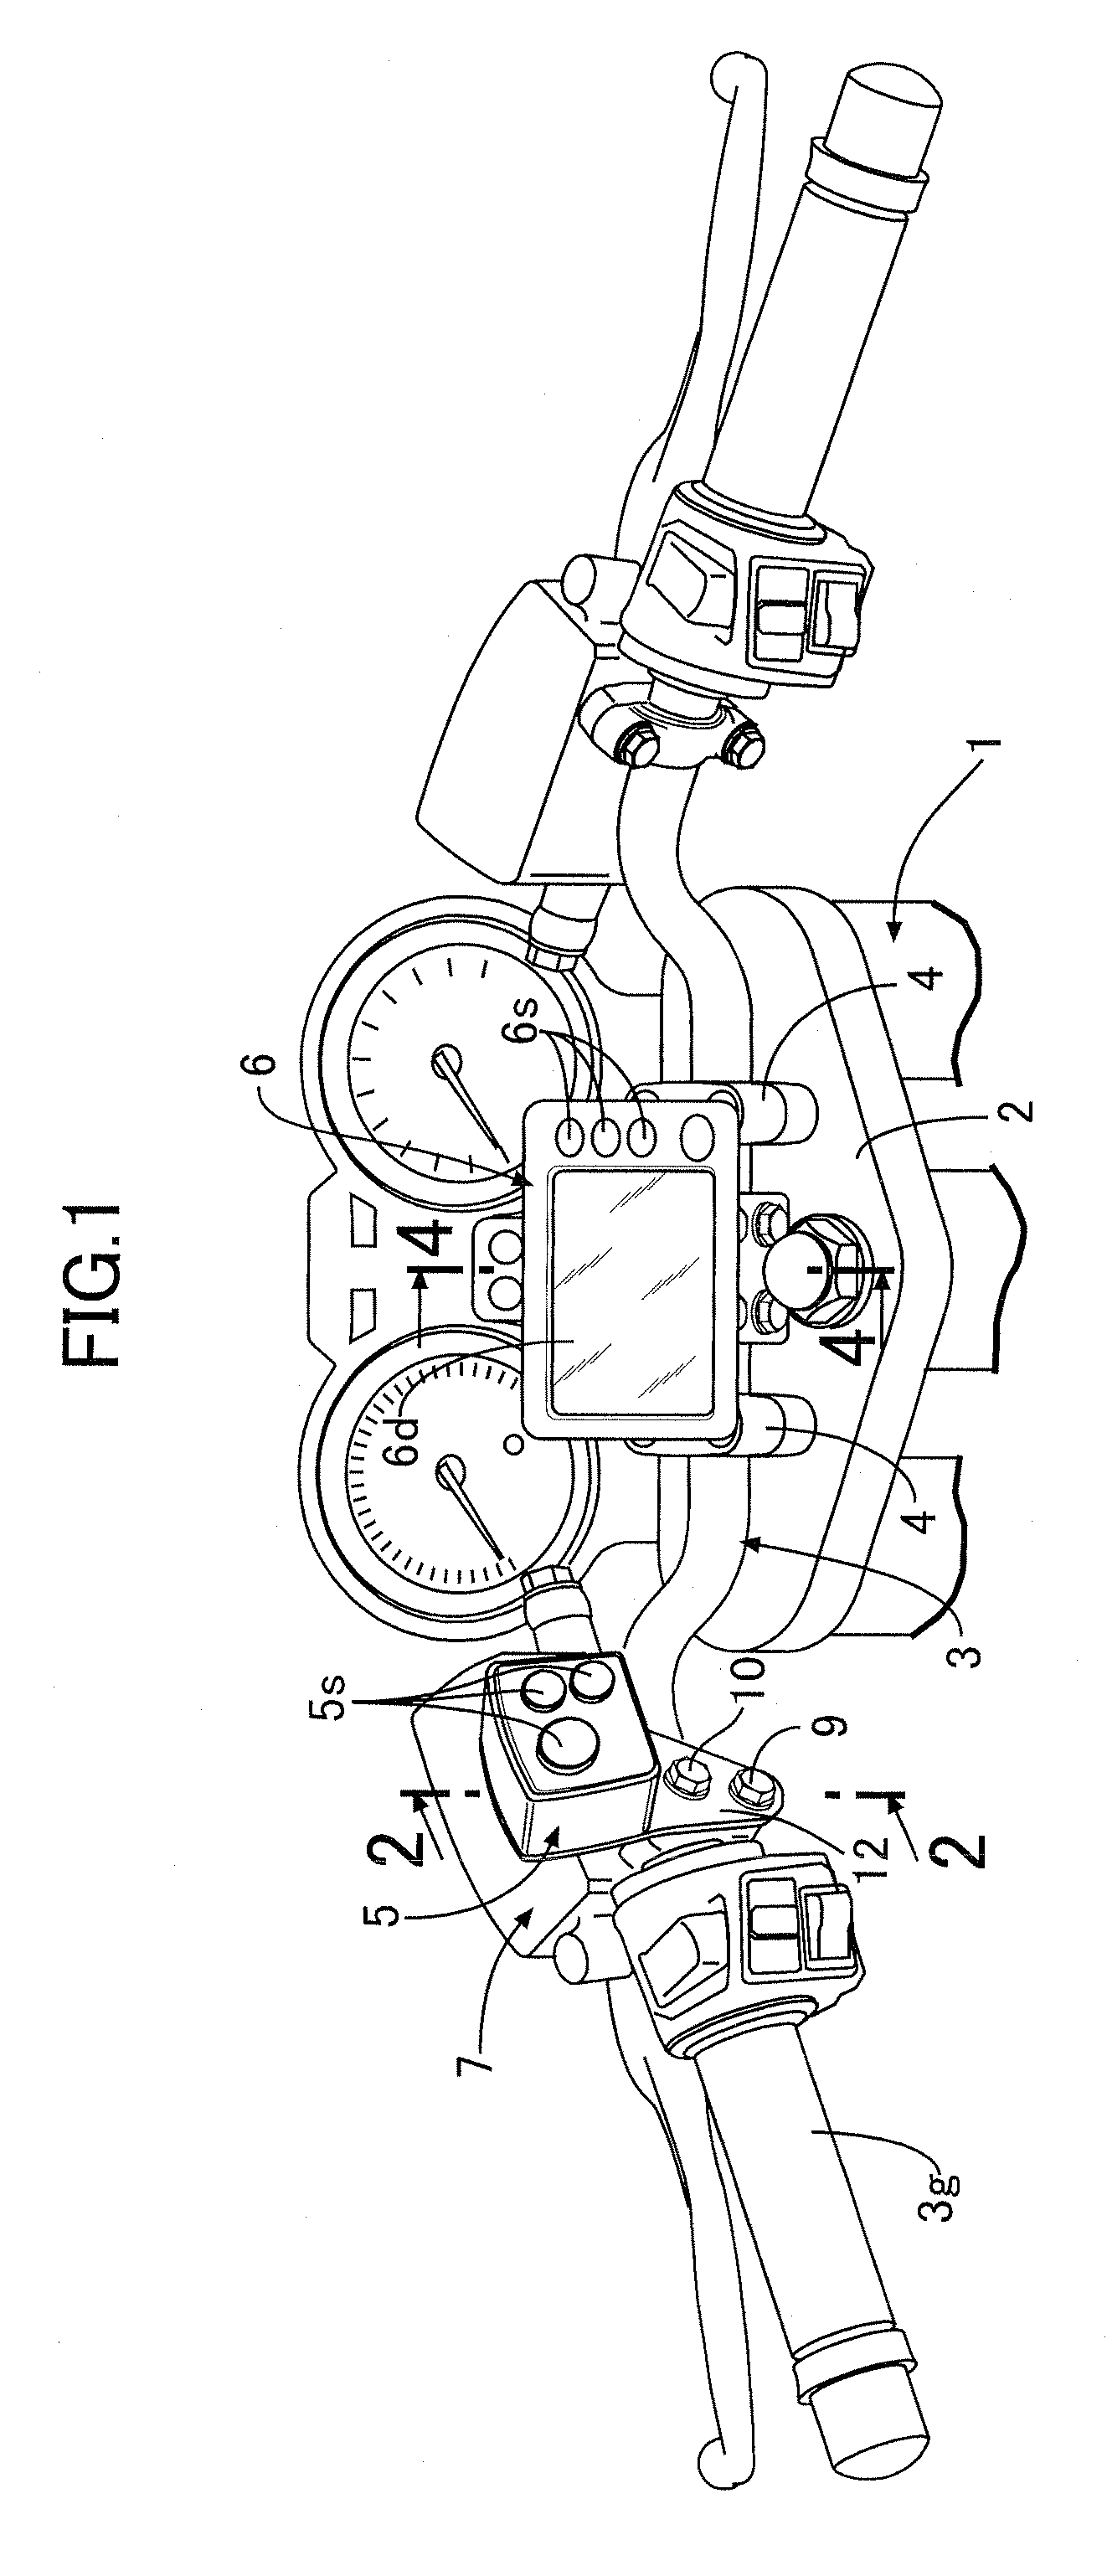 Electrical device mounting structure on a motorcycle